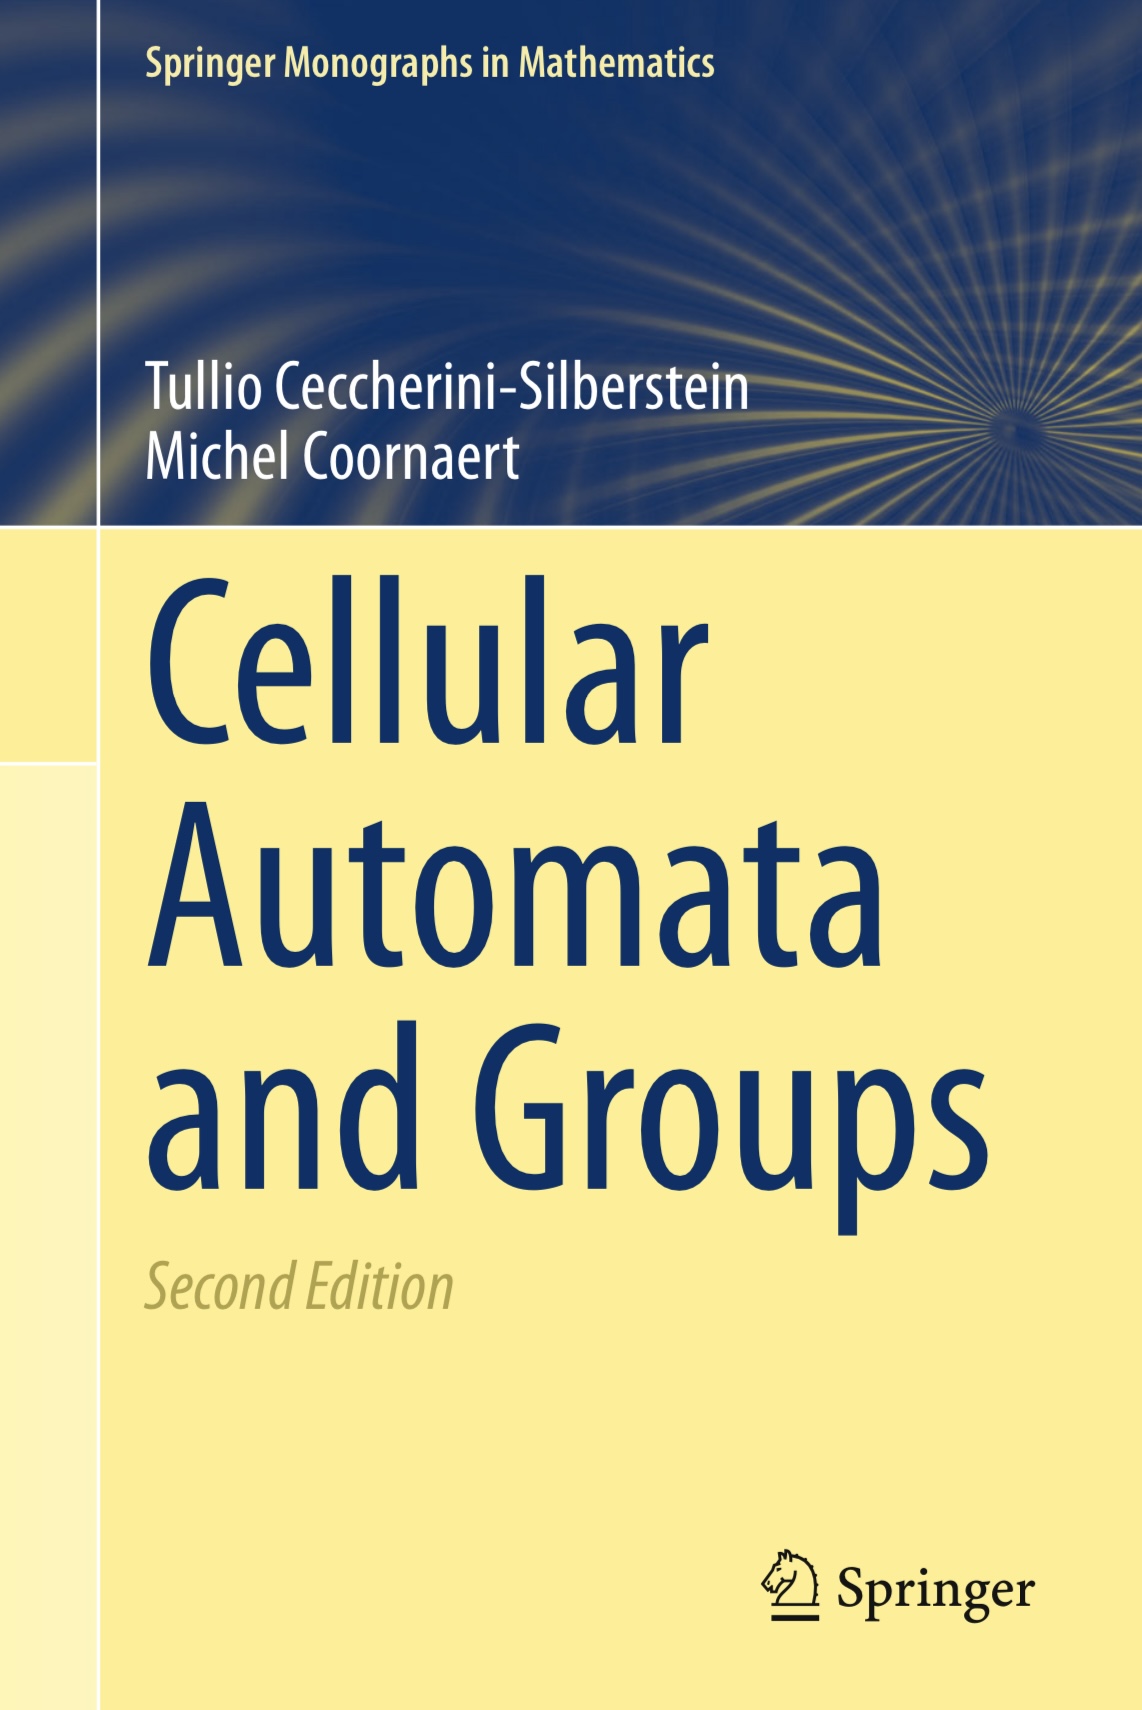 Photo du livre  Cellular automata and groups, 2nd edition